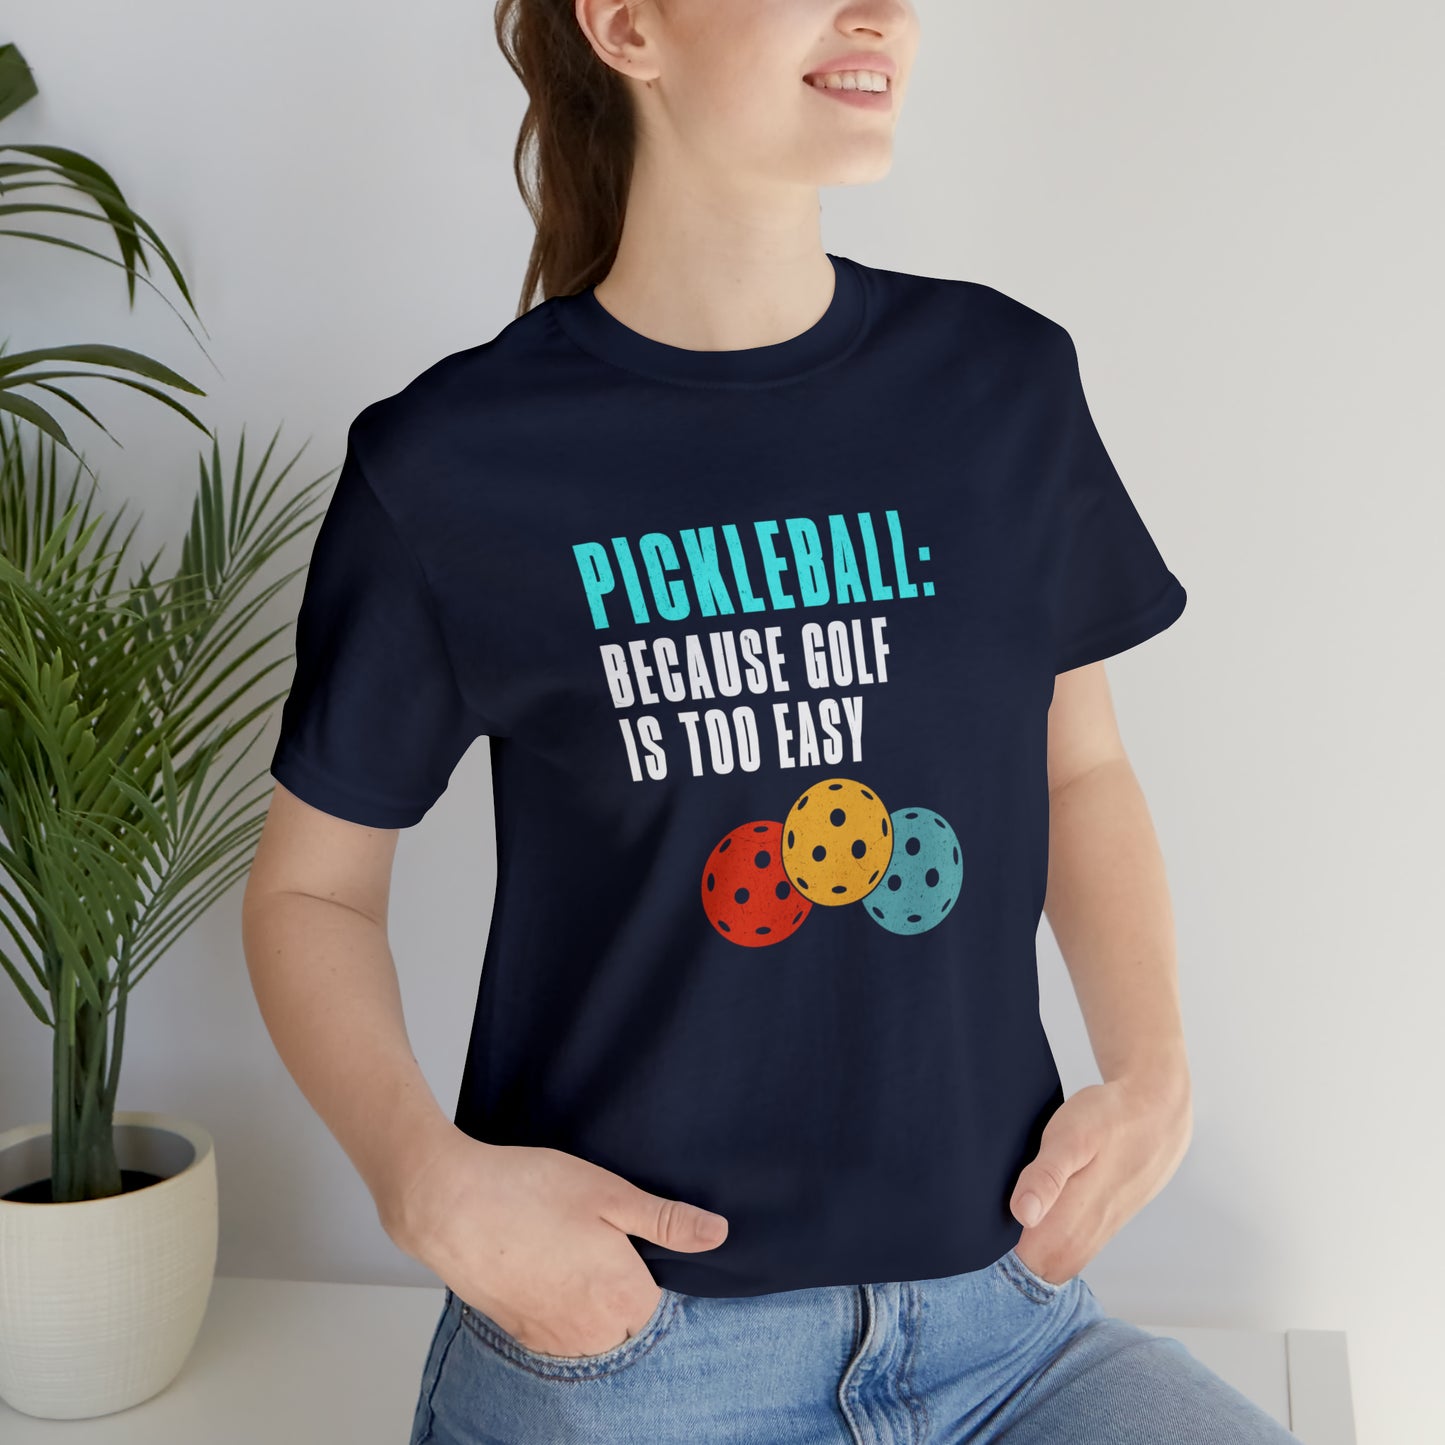 Pickleball, Because Golf is Too Easy - T-Shirt